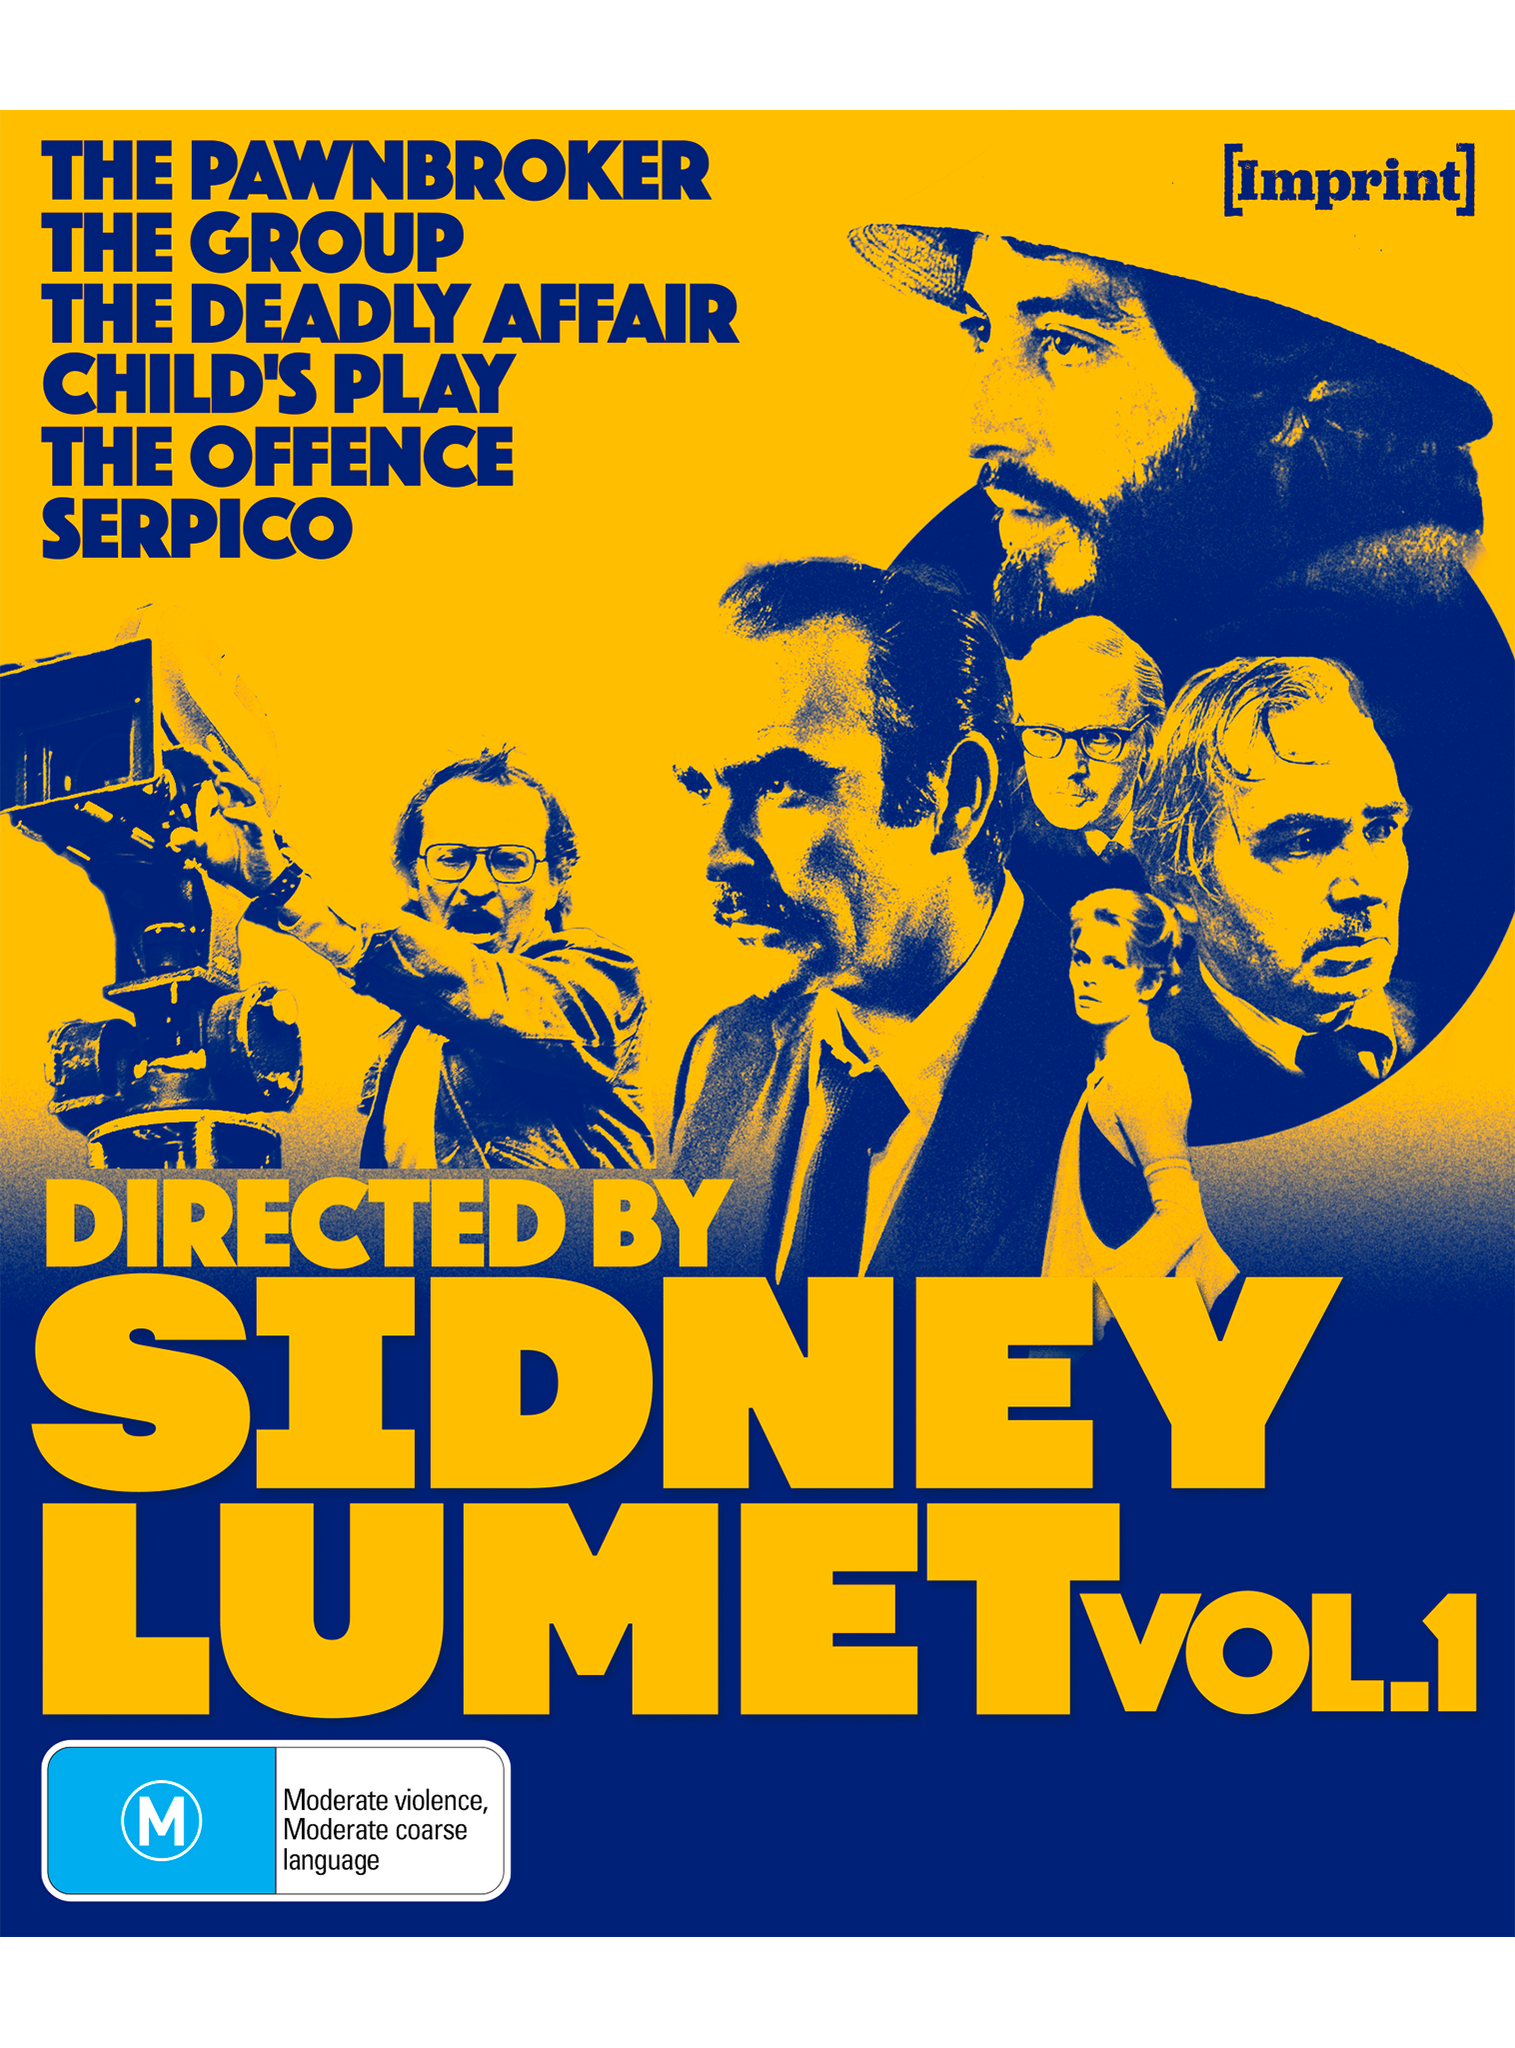 DIRECTED BY SIDNEY LUMET - VOLUME ONE (IMPRINT COLLECTION #280-285)